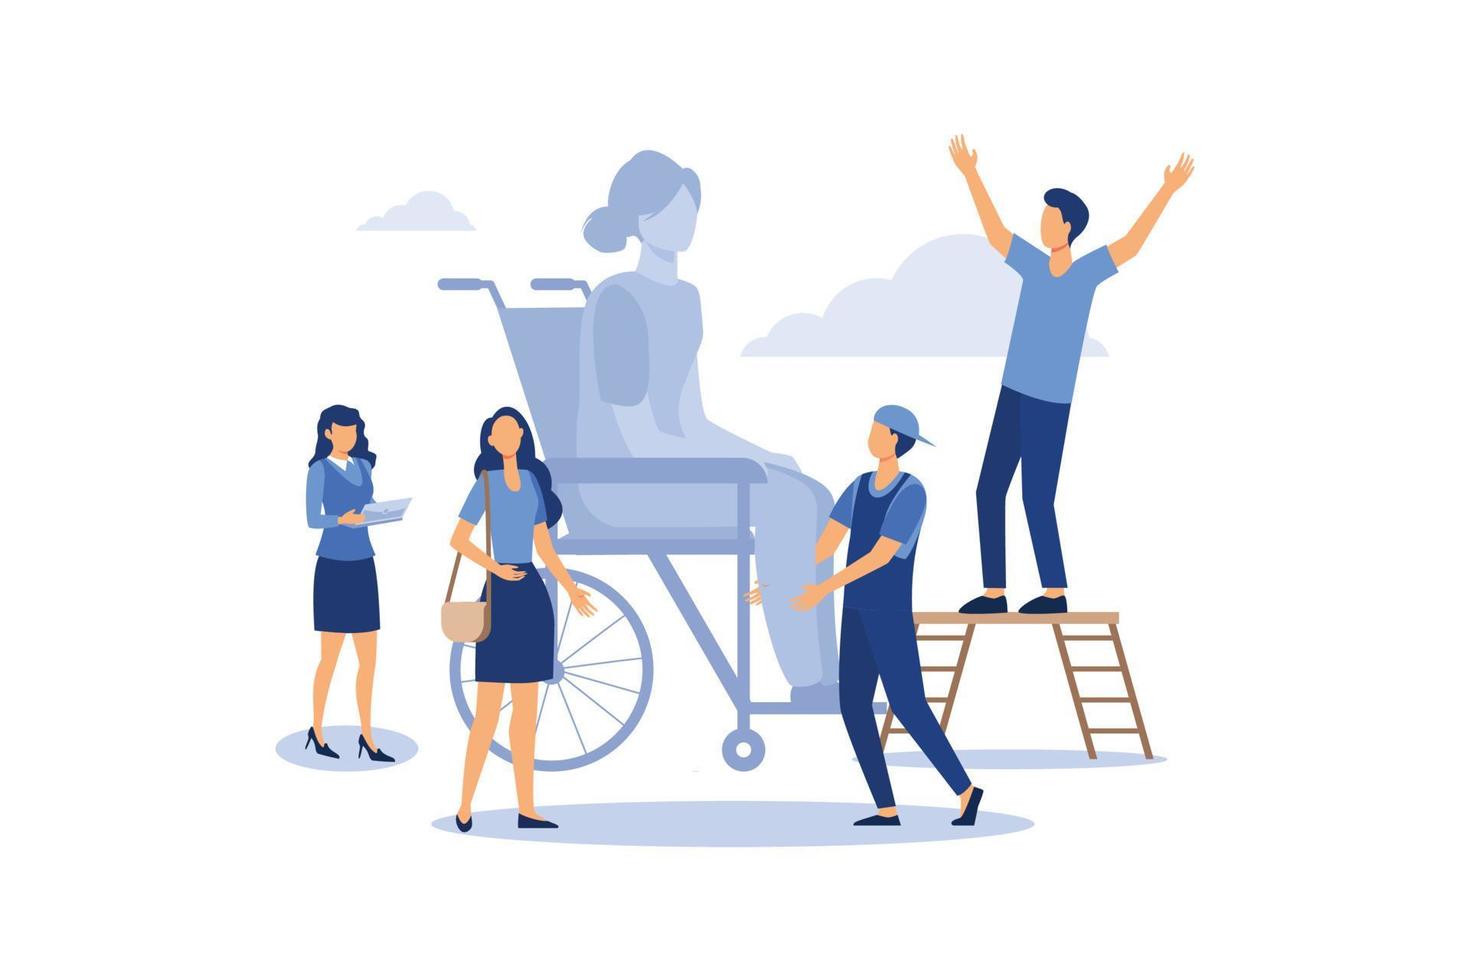 assistance to a disabled person, a person in a wheelchair helping him other people, social workers, medical help, rehabilitation flat vector illustration